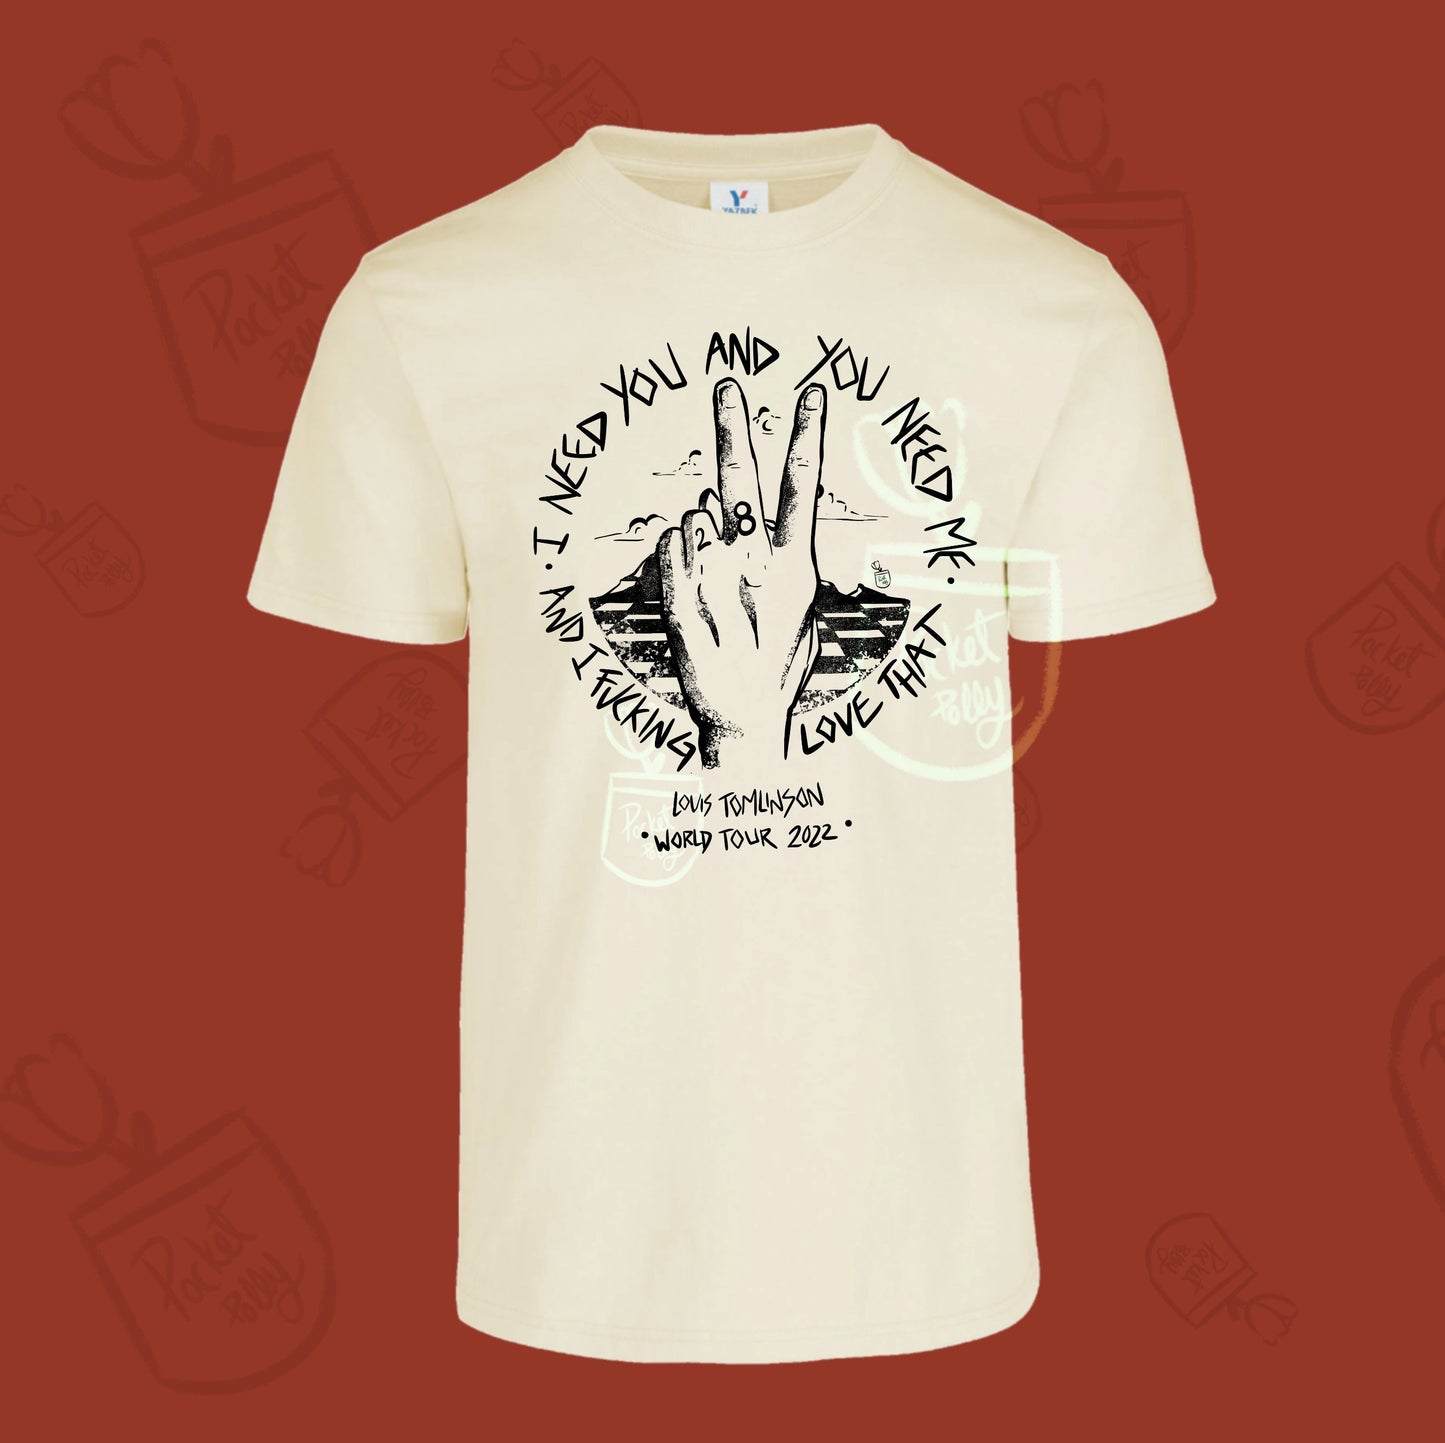 Louis Tomlinson "You need me and I need you" World Tour 2022 tshirt